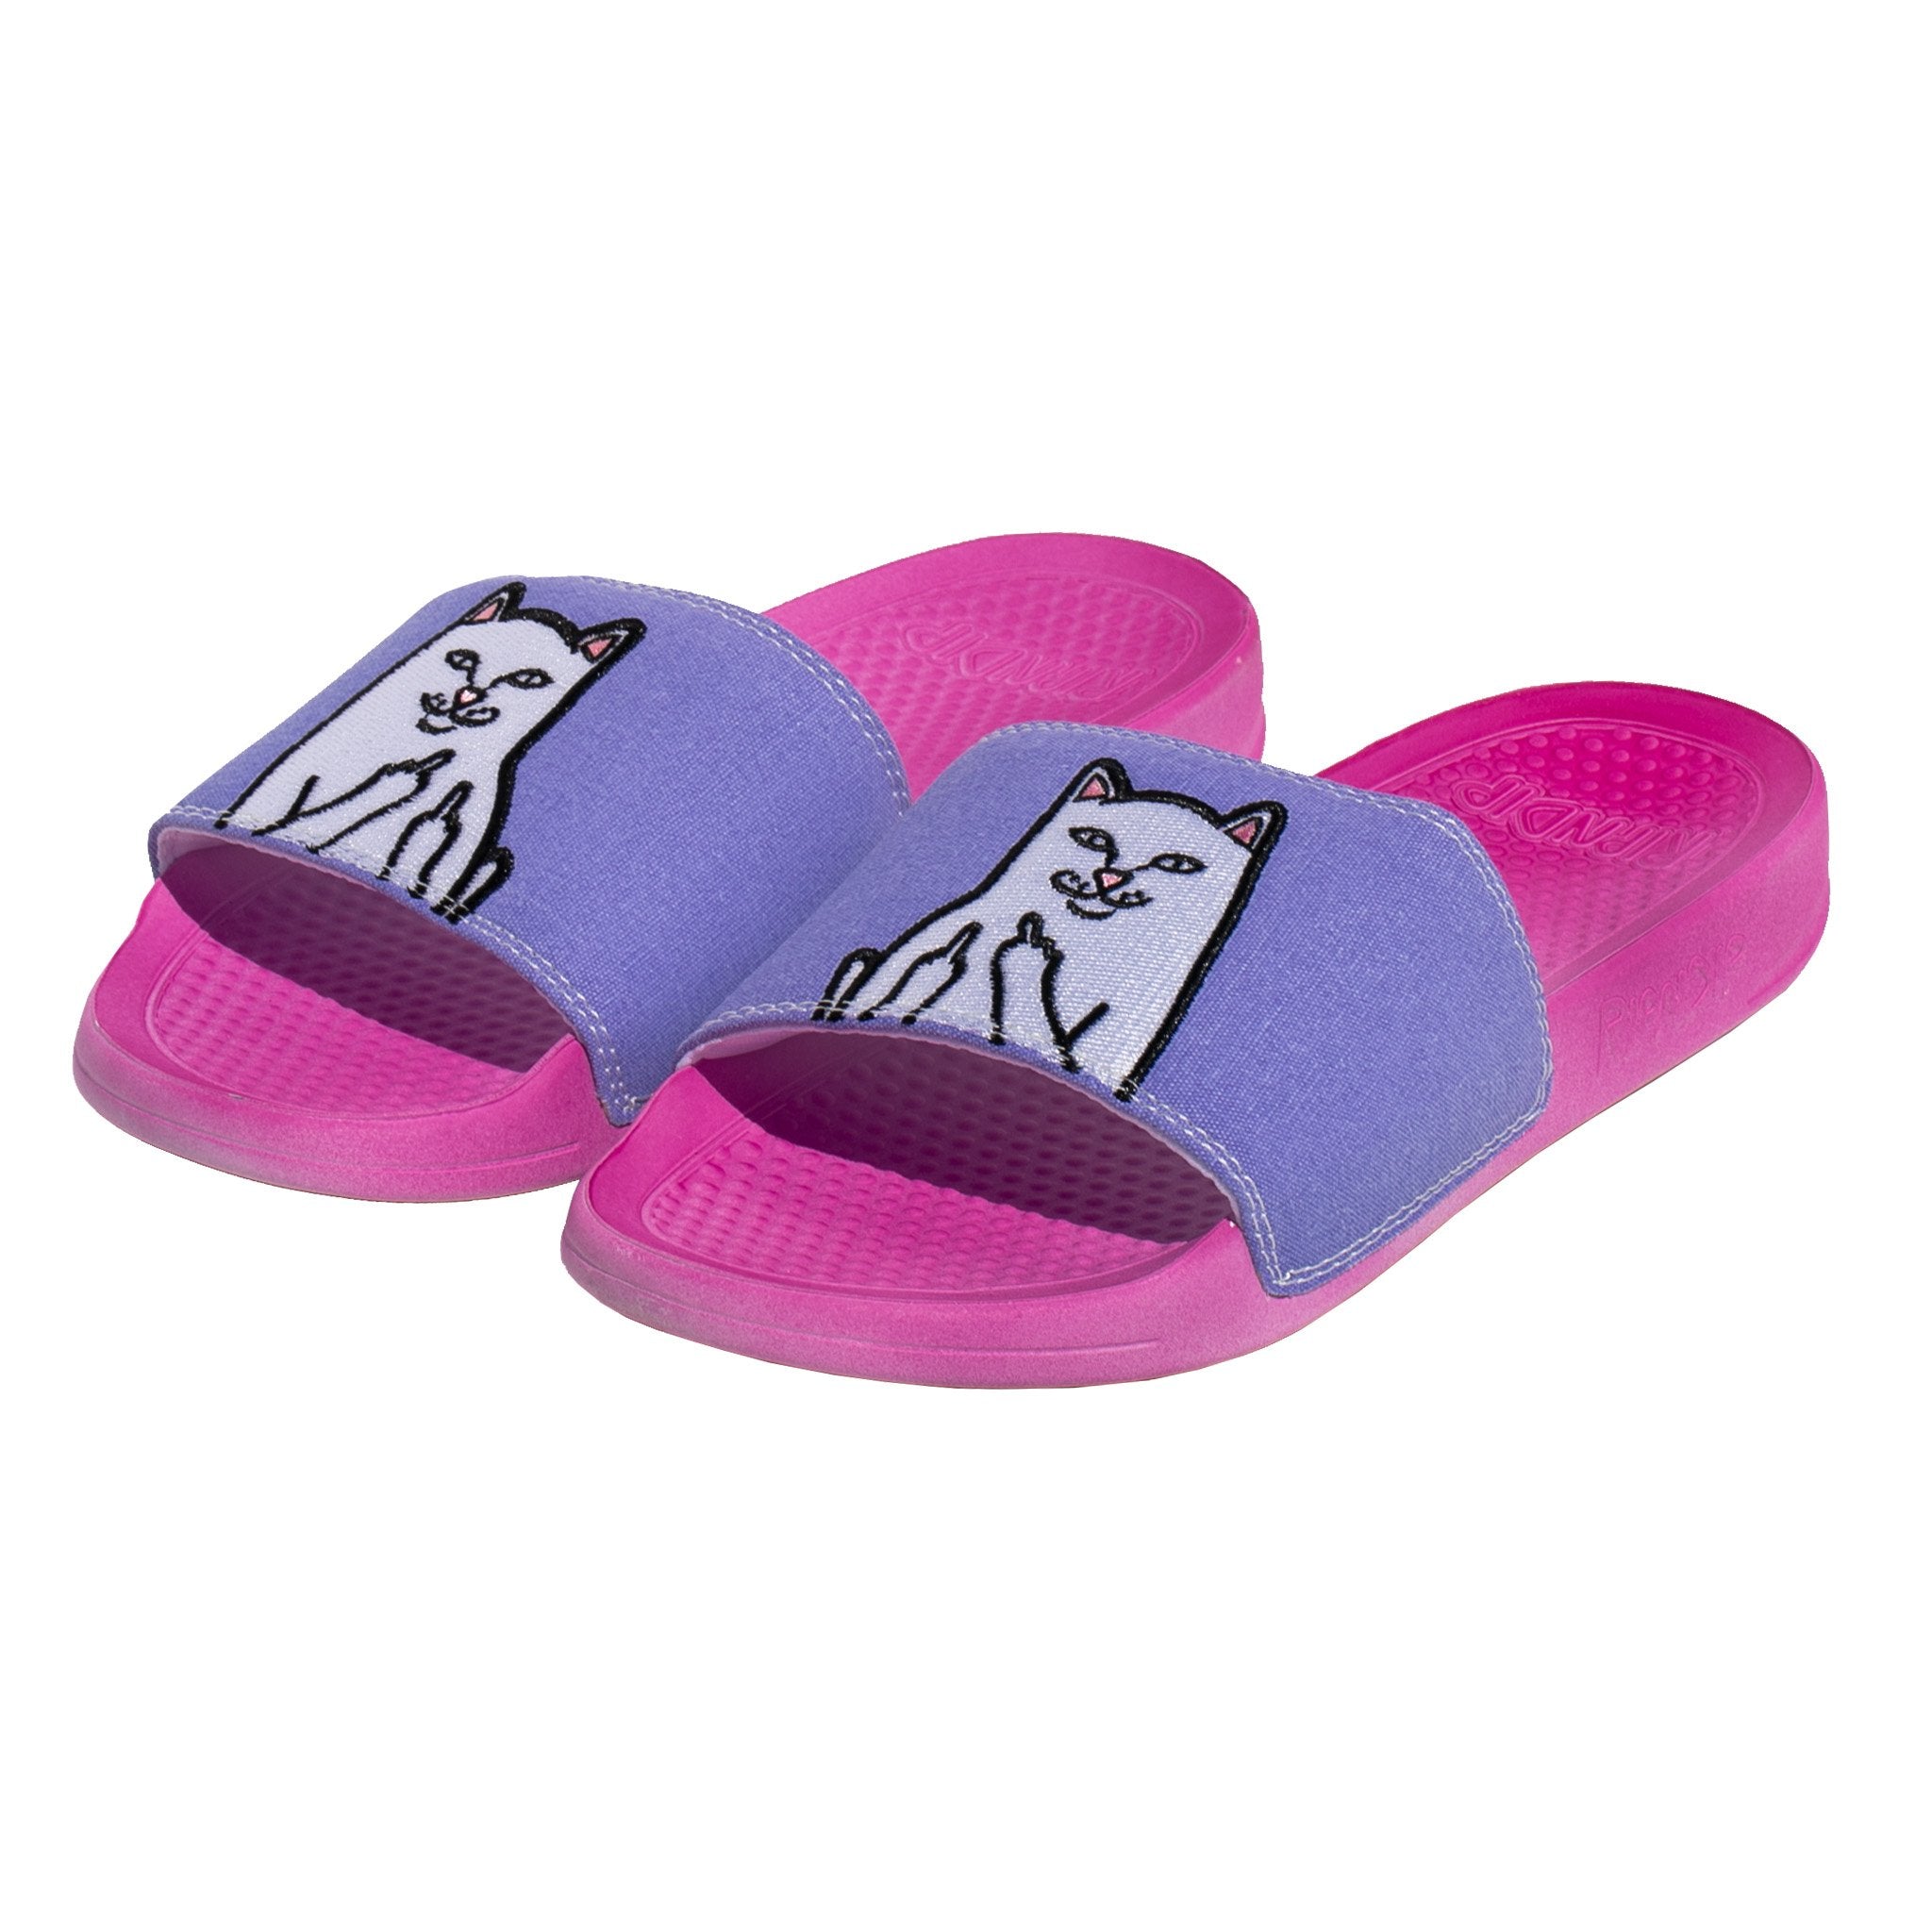 Lord Nermal Slides UV Activated (Blue/Fuschia)